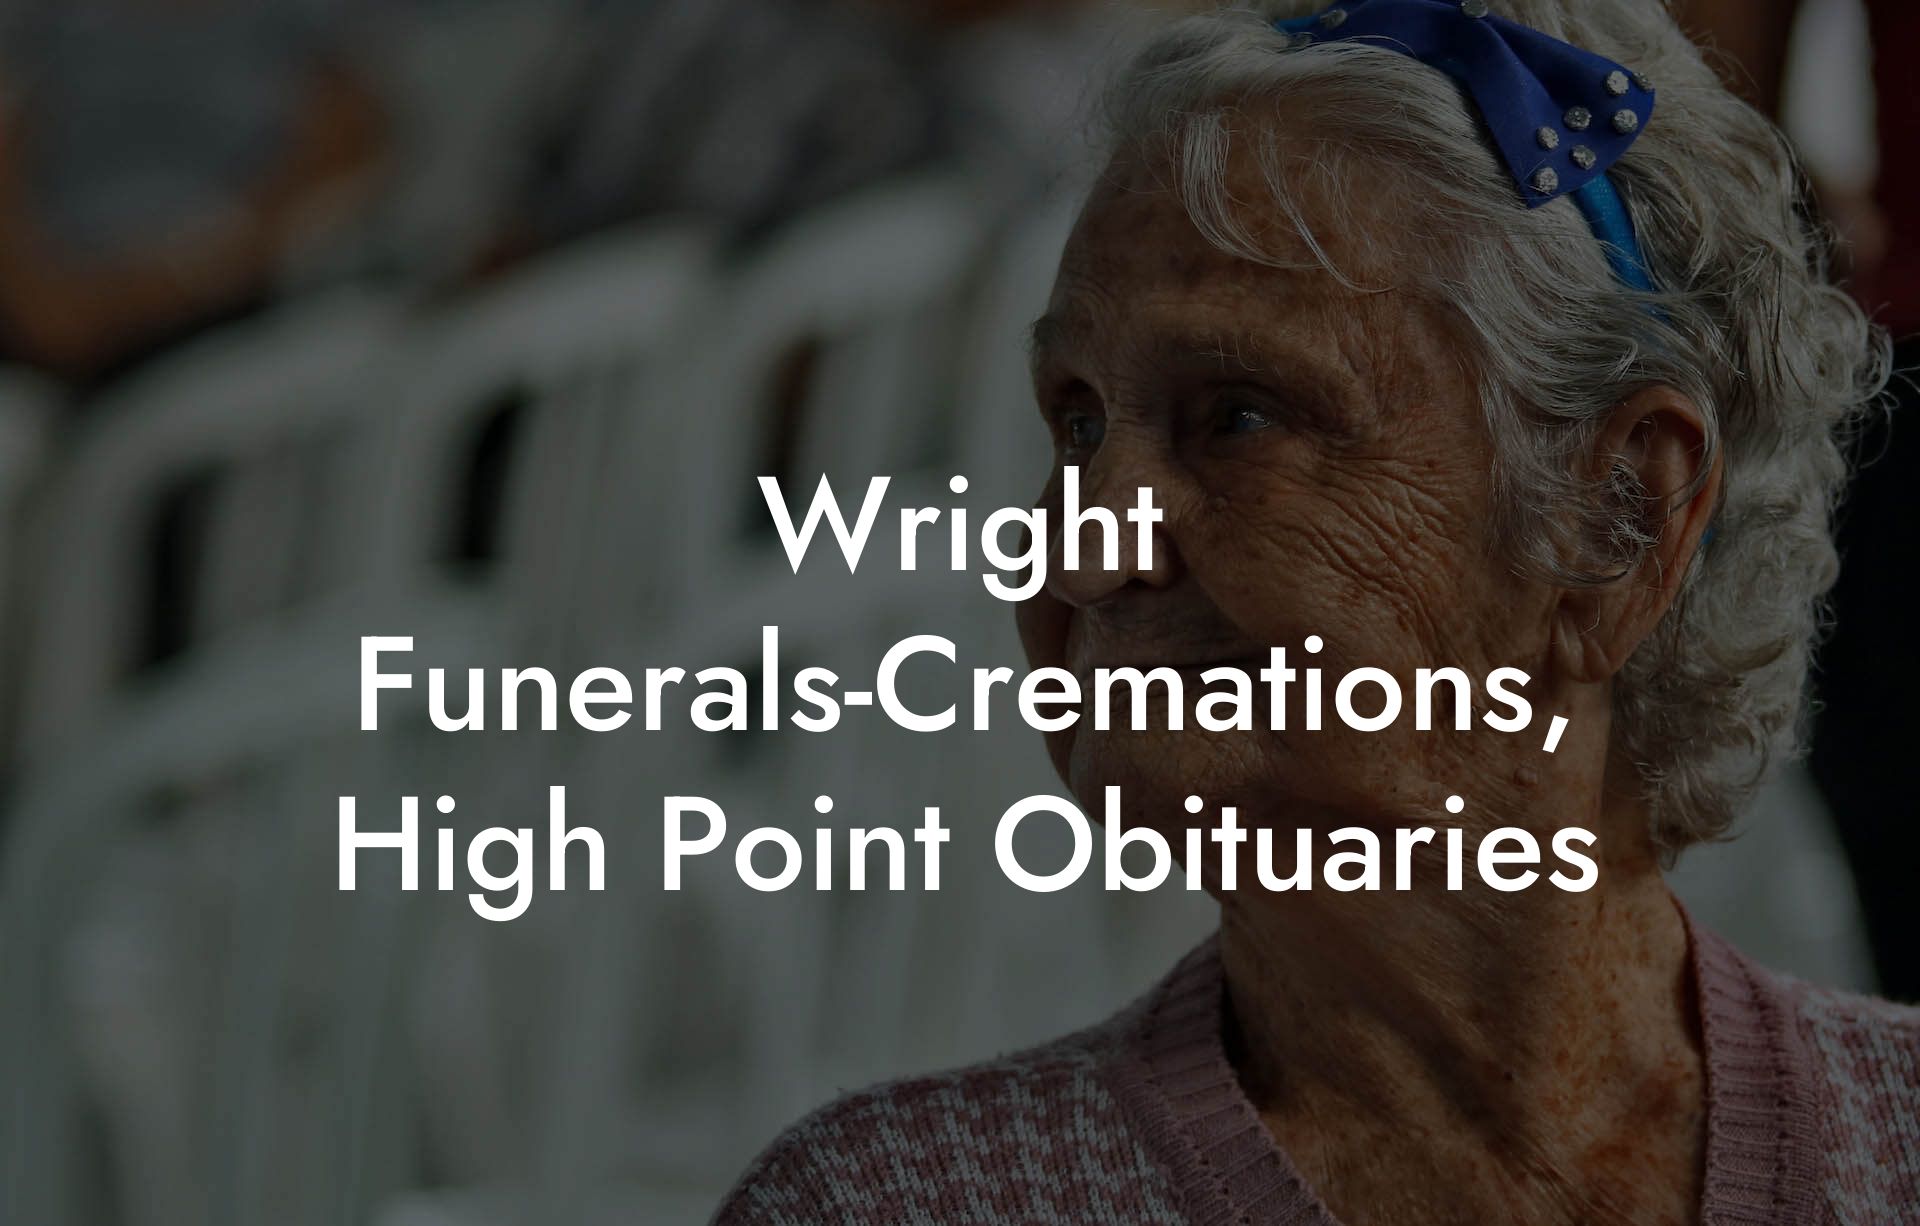 Wright Funerals-Cremations, High Point Obituaries